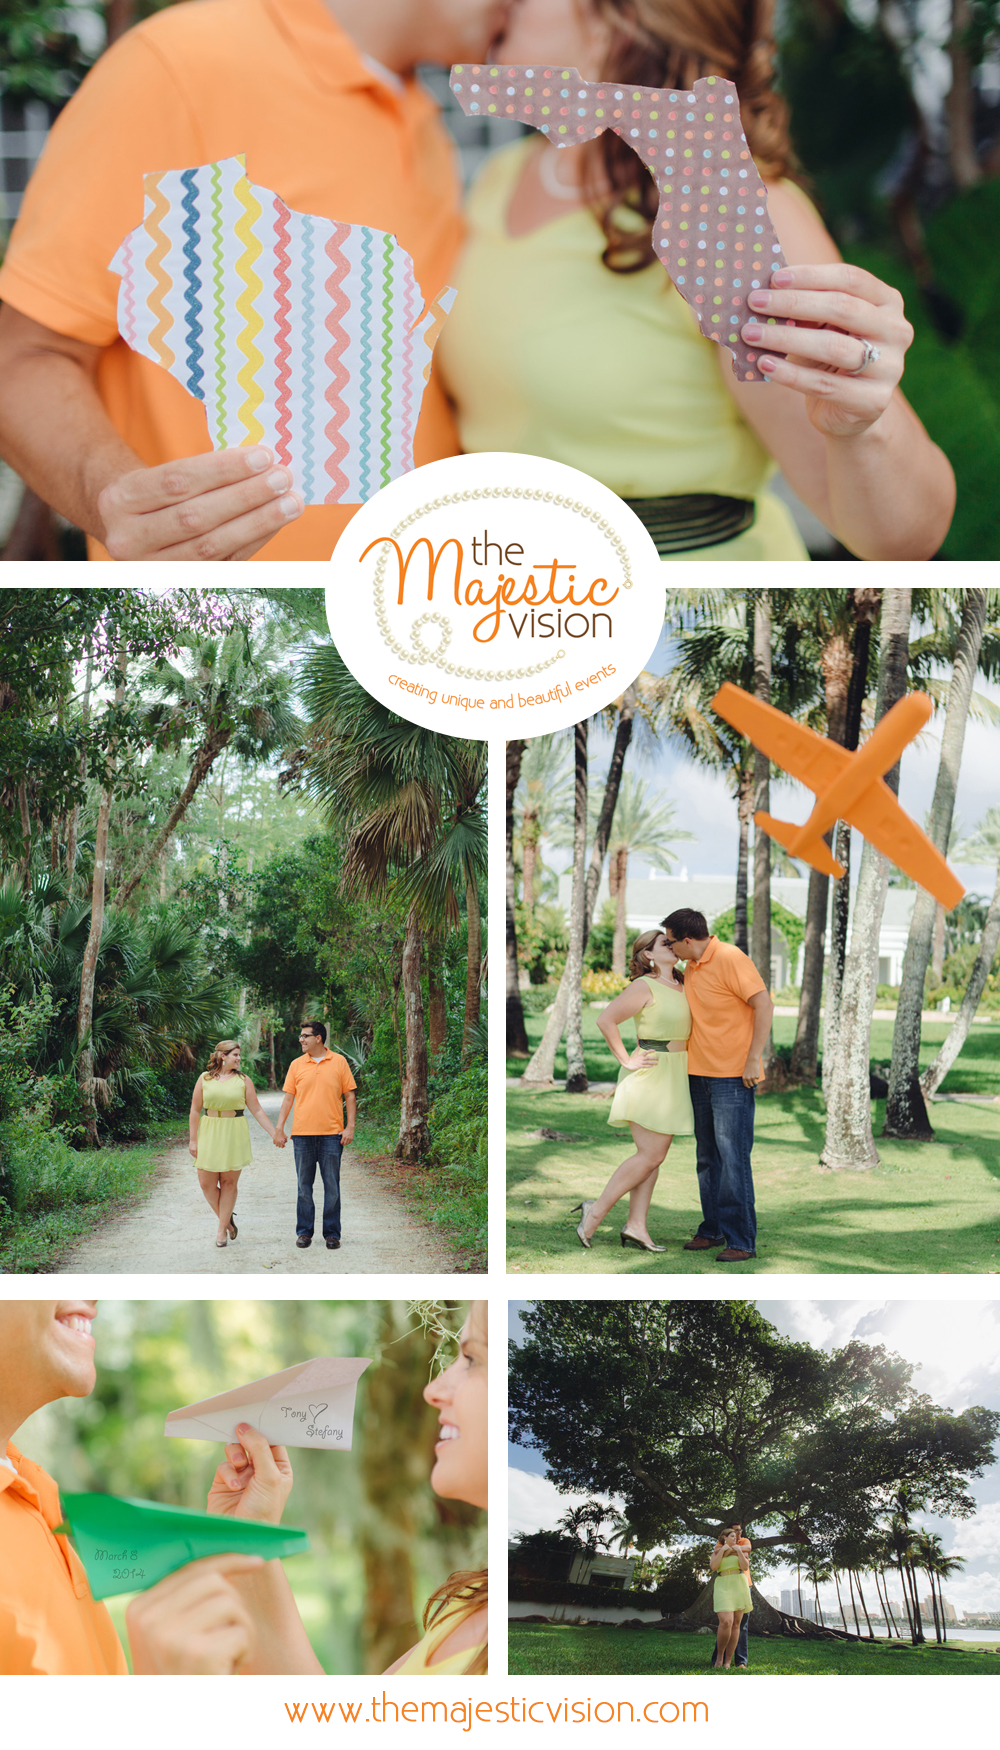 Travel Theme Engagement Session with State Cutouts | The Majestic Vision Wedding Planning | Royal Poinciana Chapel in Palm Beach, FL | www.themajesticvision.com | Robert Madrid Photography